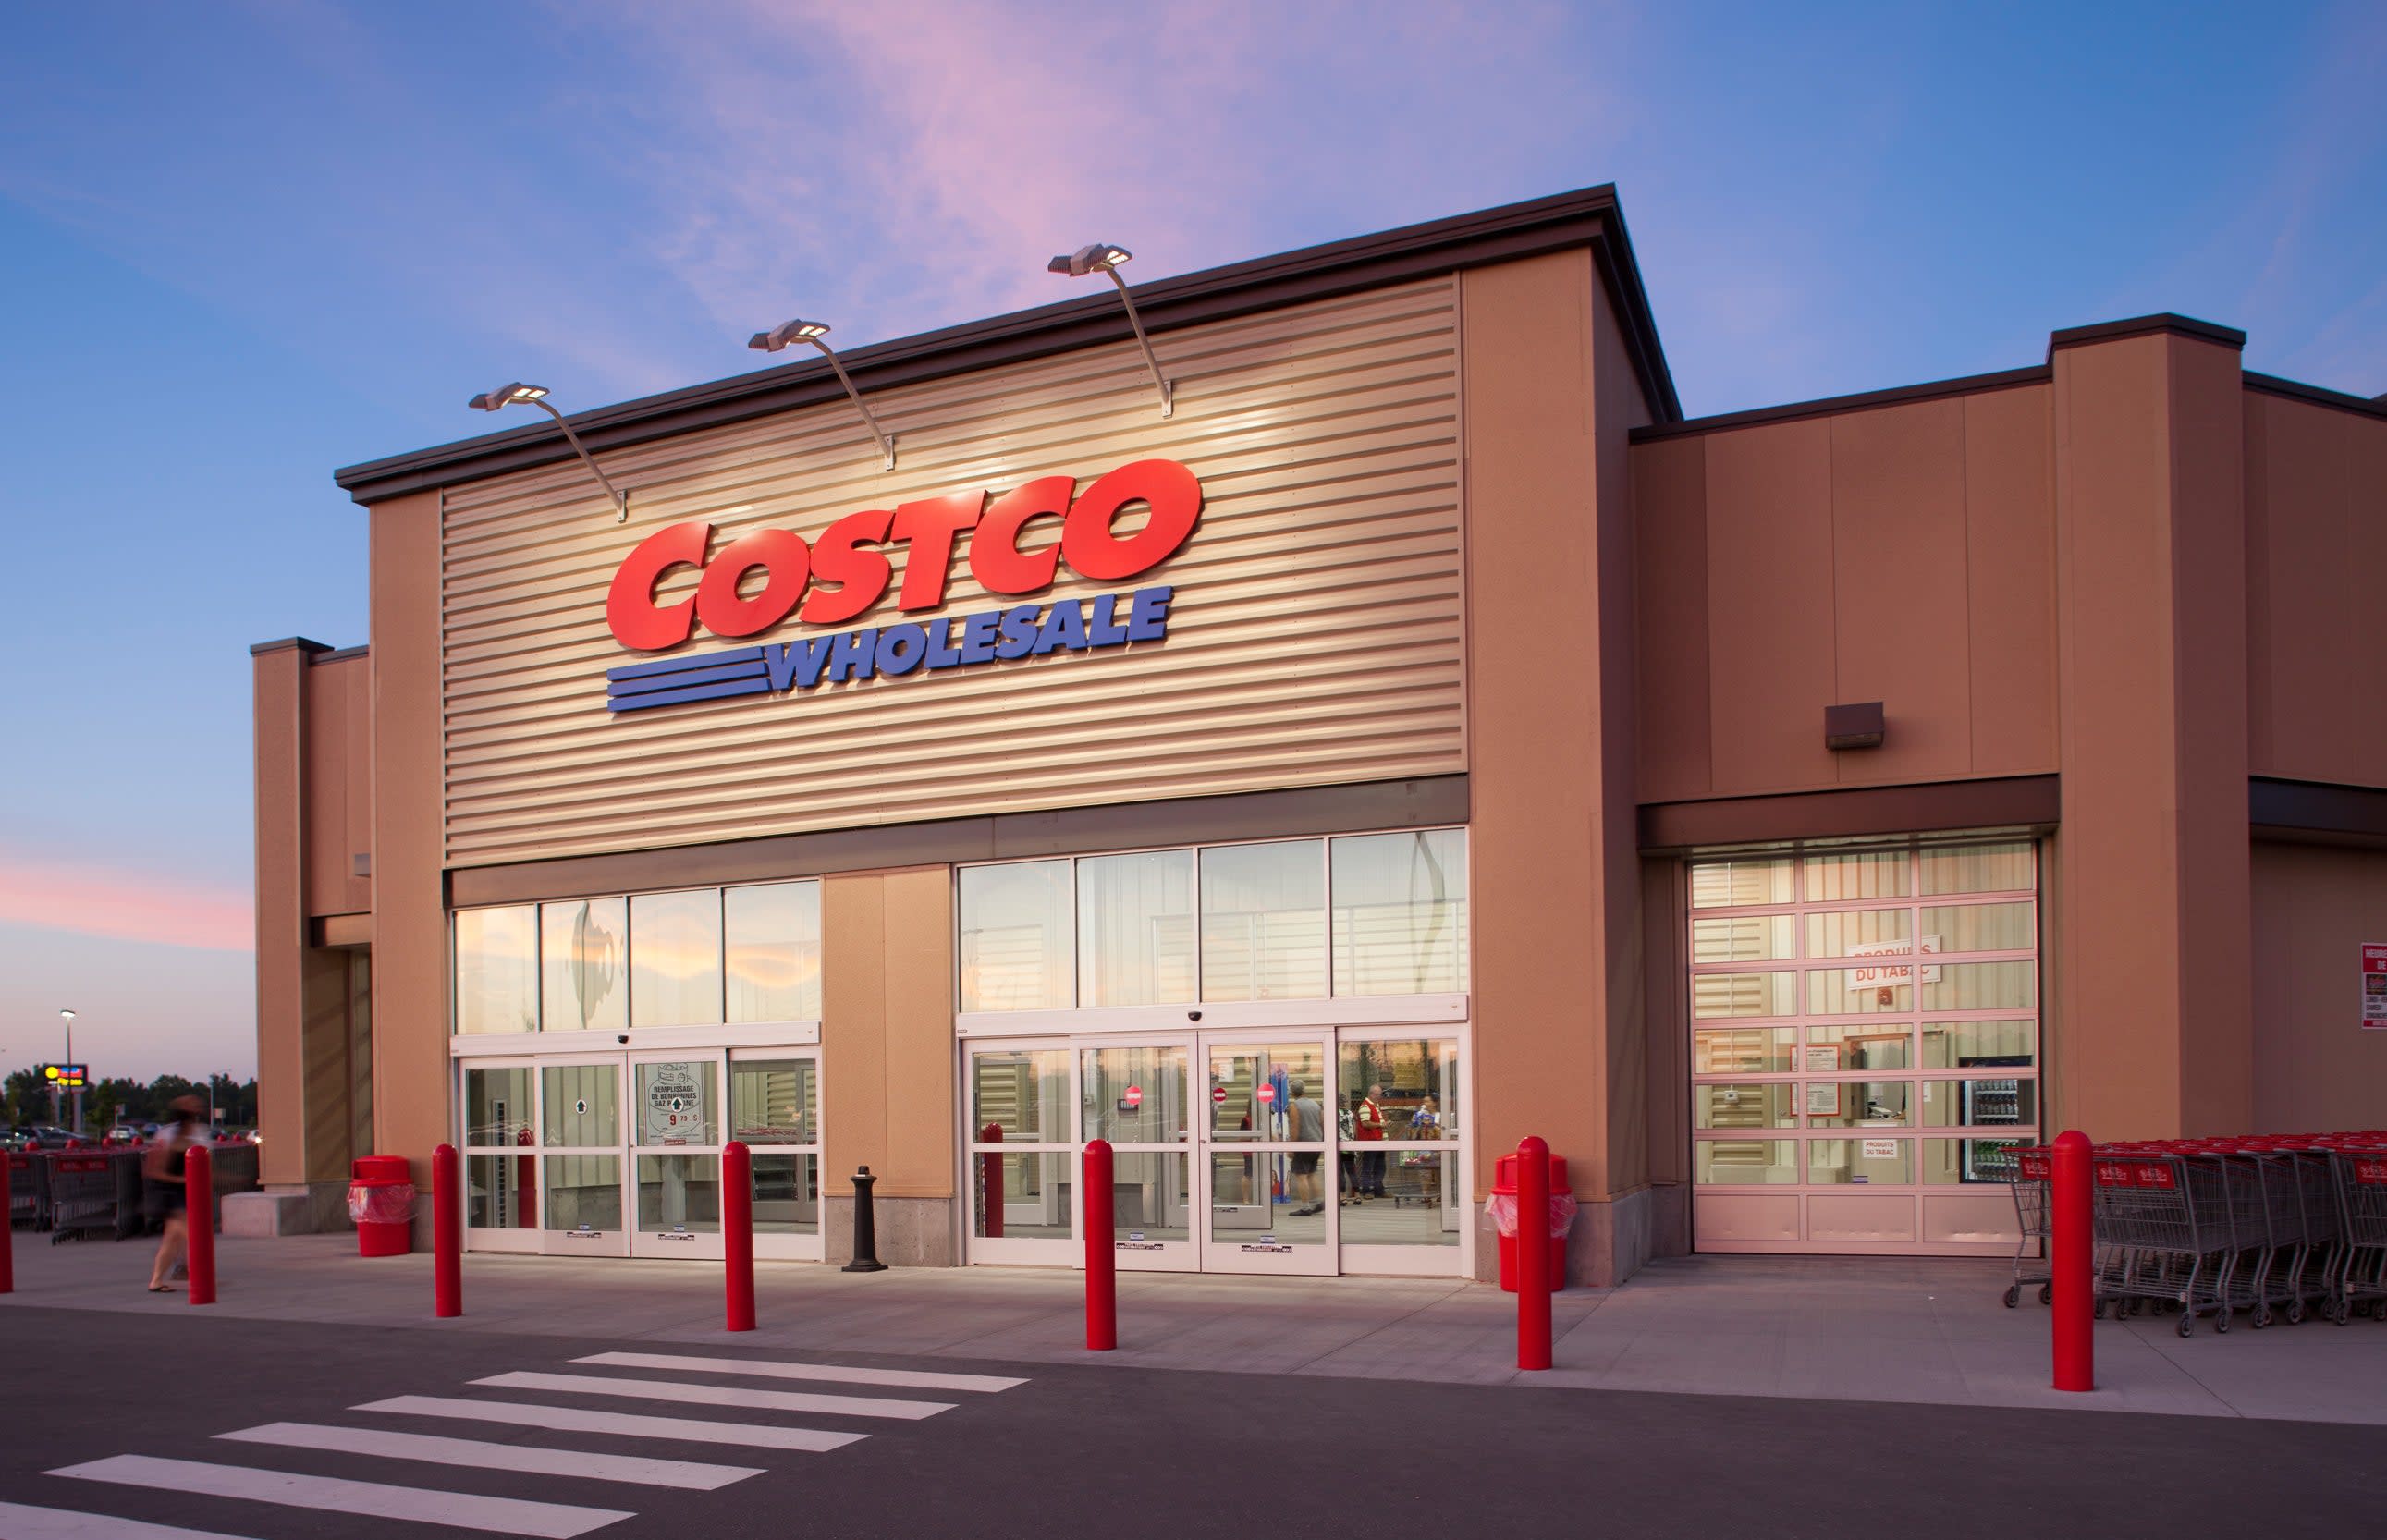 Want the New Citi Costco Card? Here's What You Should Know